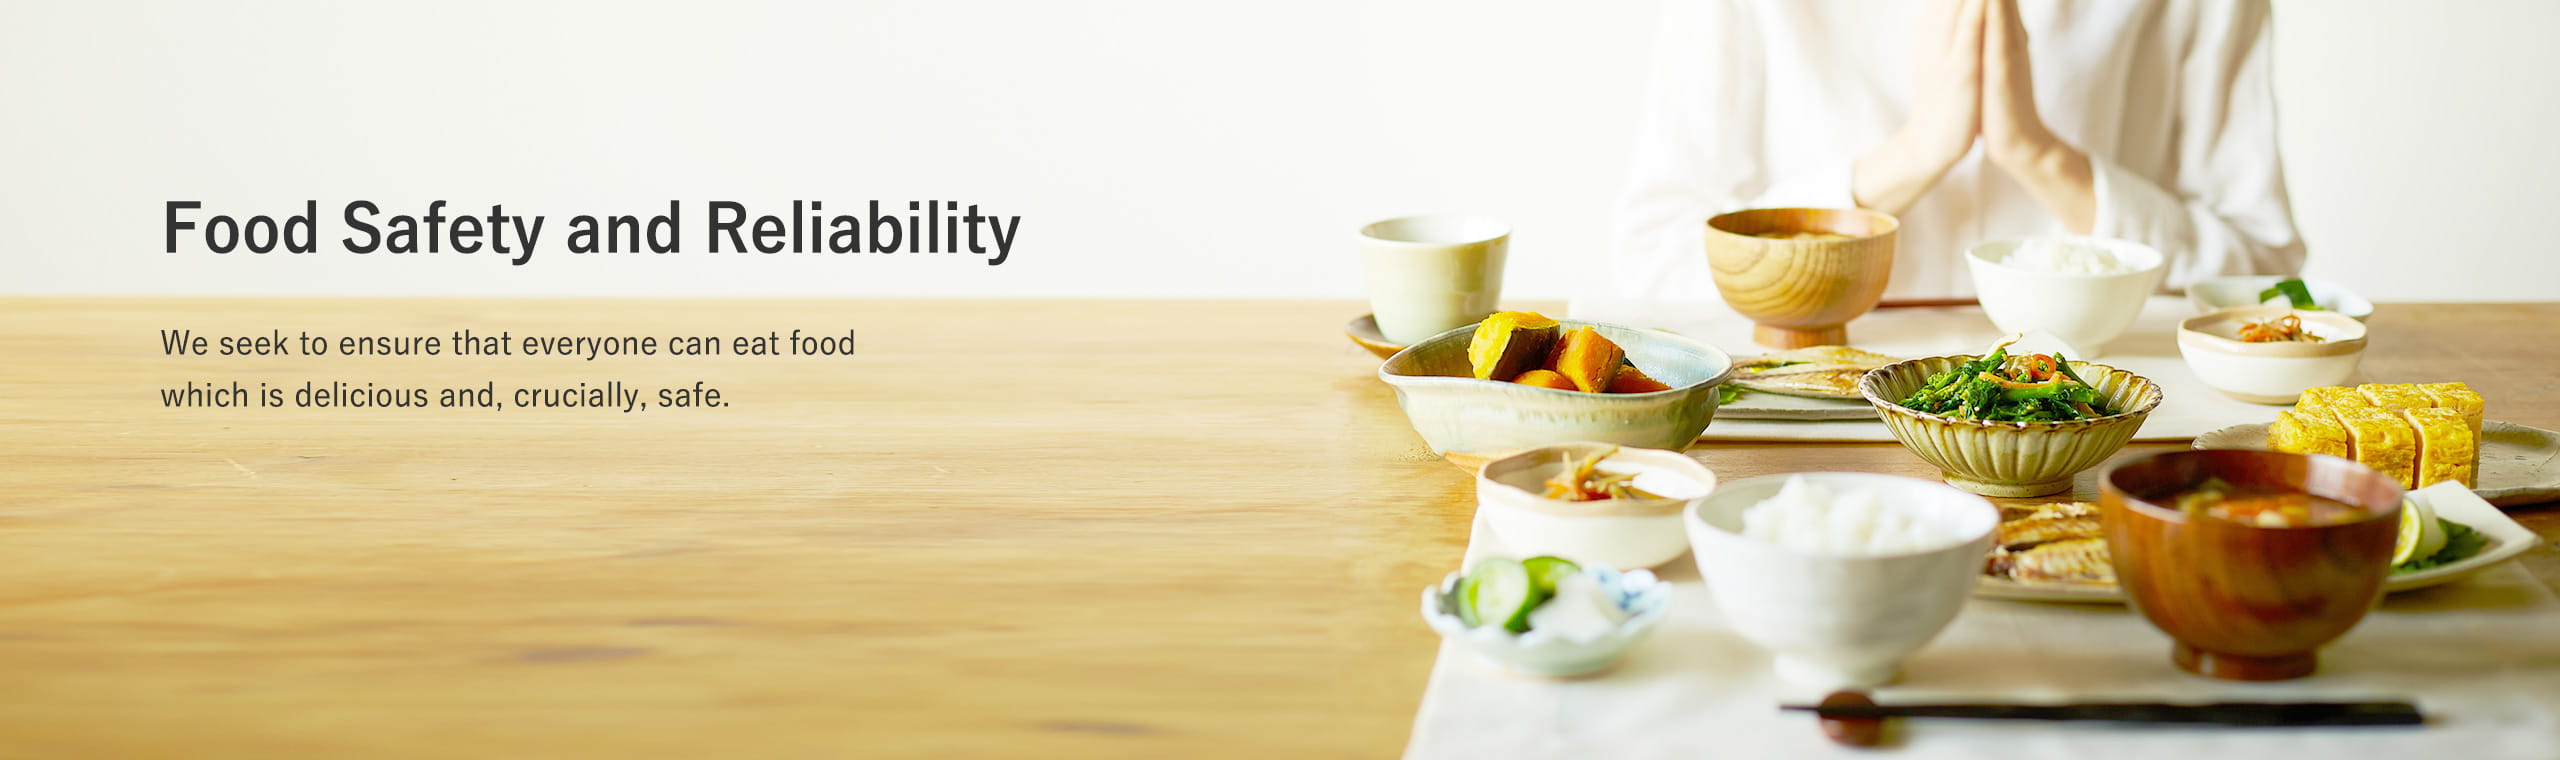 Food Safety and Reliability We seek to ensure that everyone can eat food which is delicious and, crucially, safe.